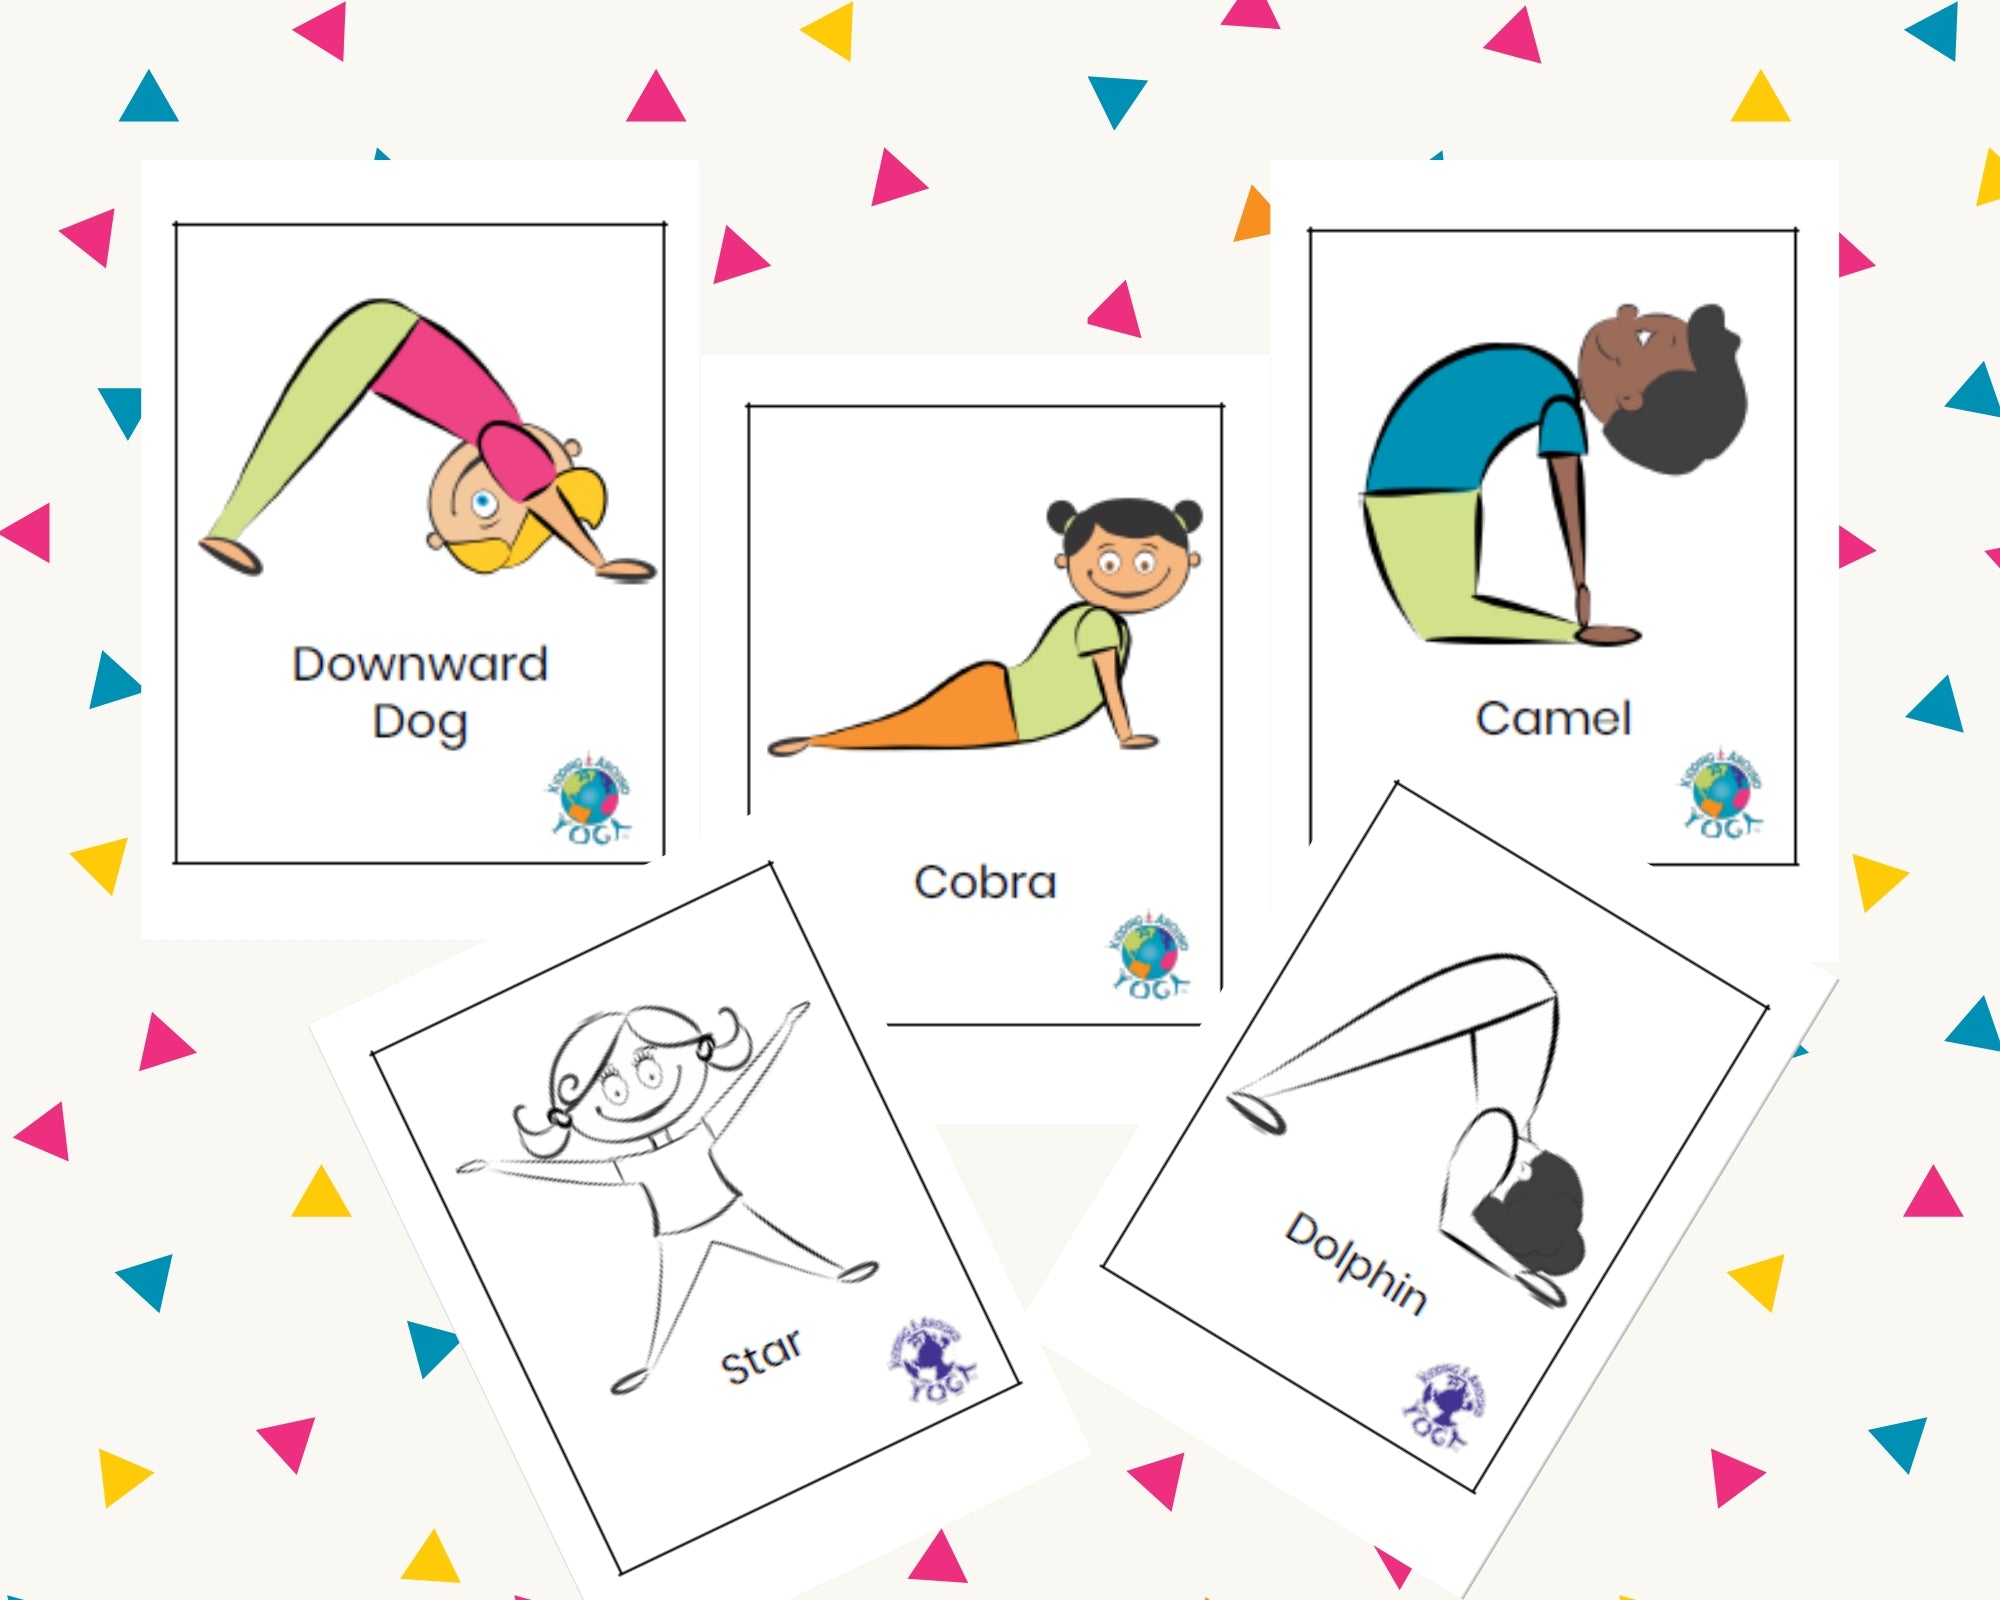 Nature-Inspired Yoga Poses for Kids to Encourage Movement and Calmness